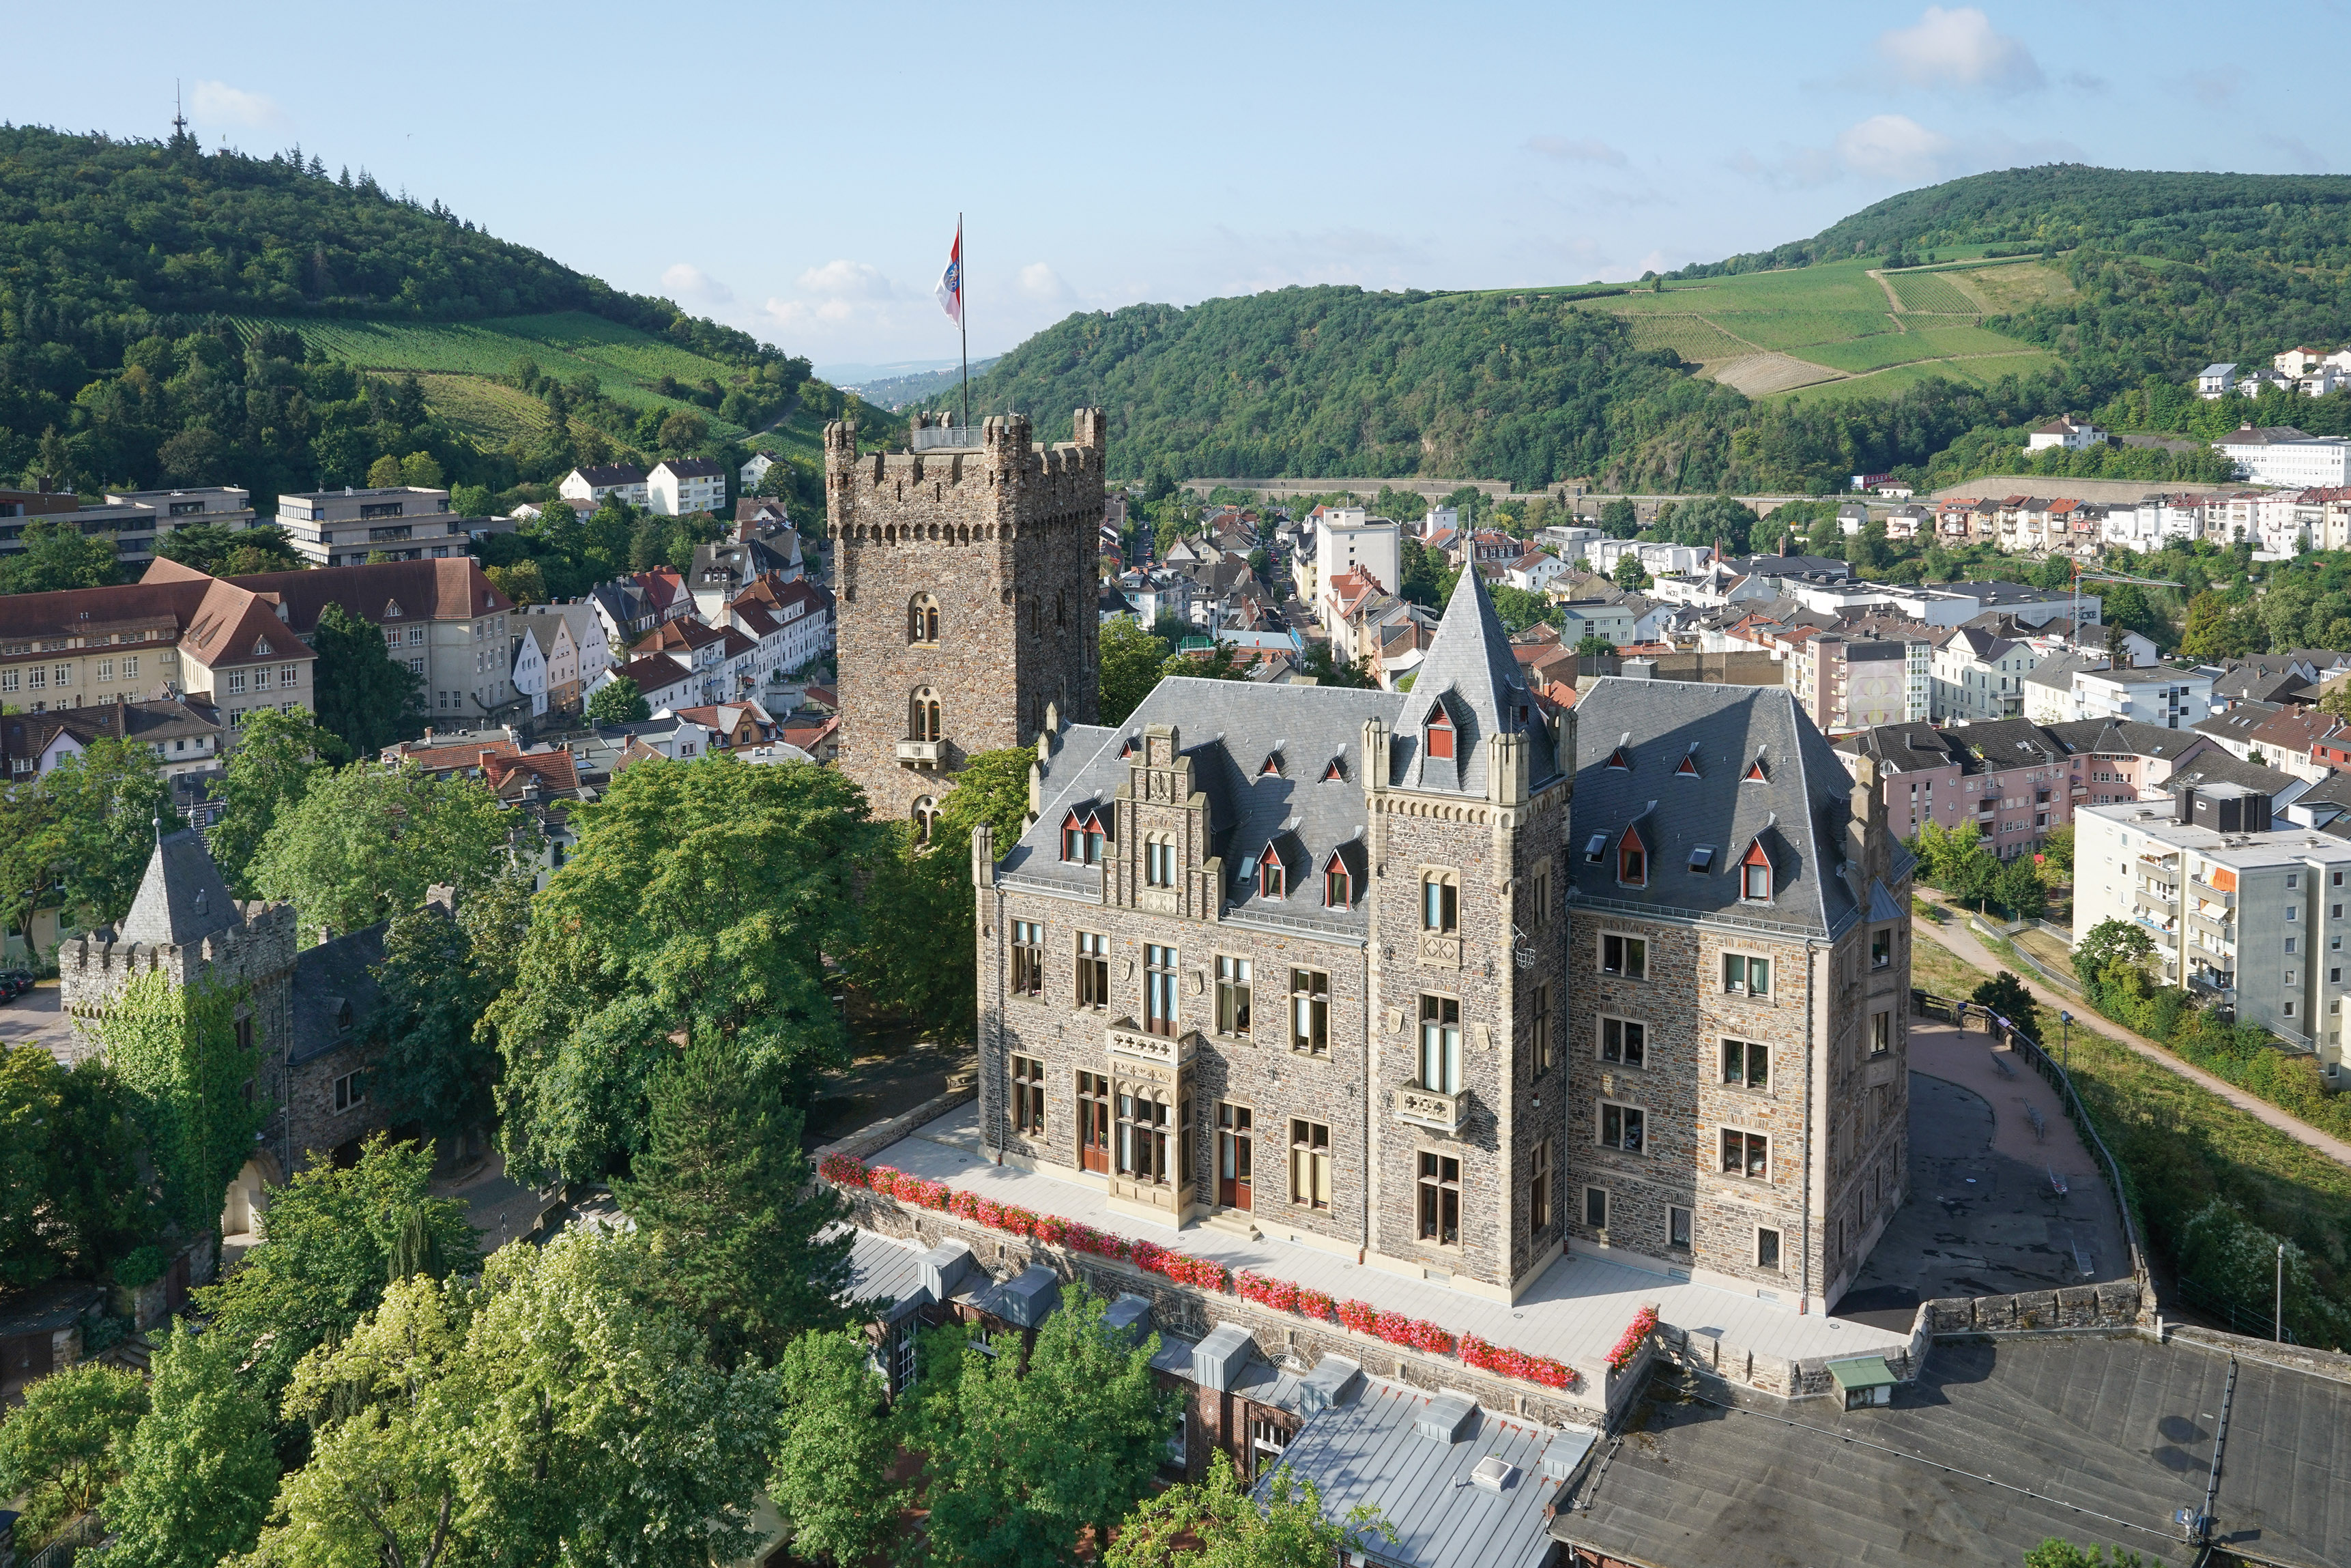 Klopp Castle in Bingen am Rhein is regarded as the town’s landmark and is home, among other things, to the mayor’s office and part of the municipal government.